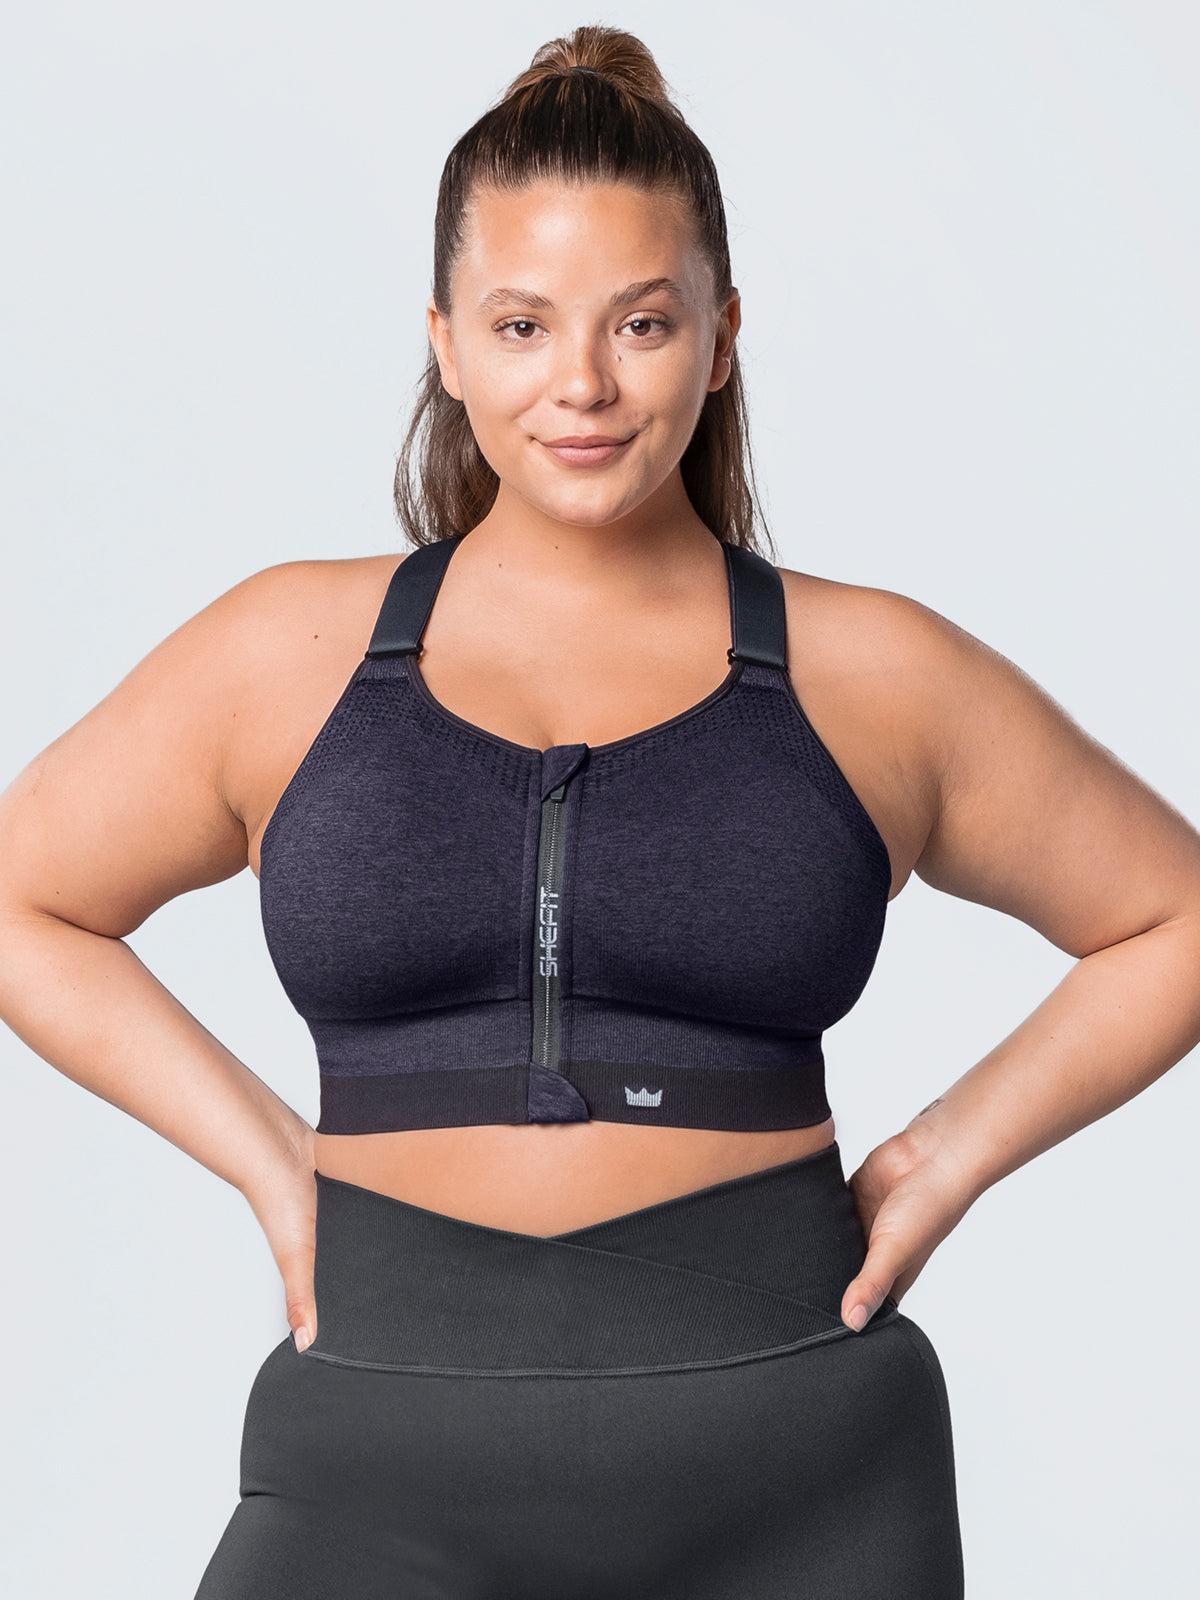 Razzi Fidel High-Impact Sports Bra for Women - No Bounce, Busty- Friendly,  Compression Fit Black (US, Alpha, Small, Regular, Regular) at   Women's Clothing store